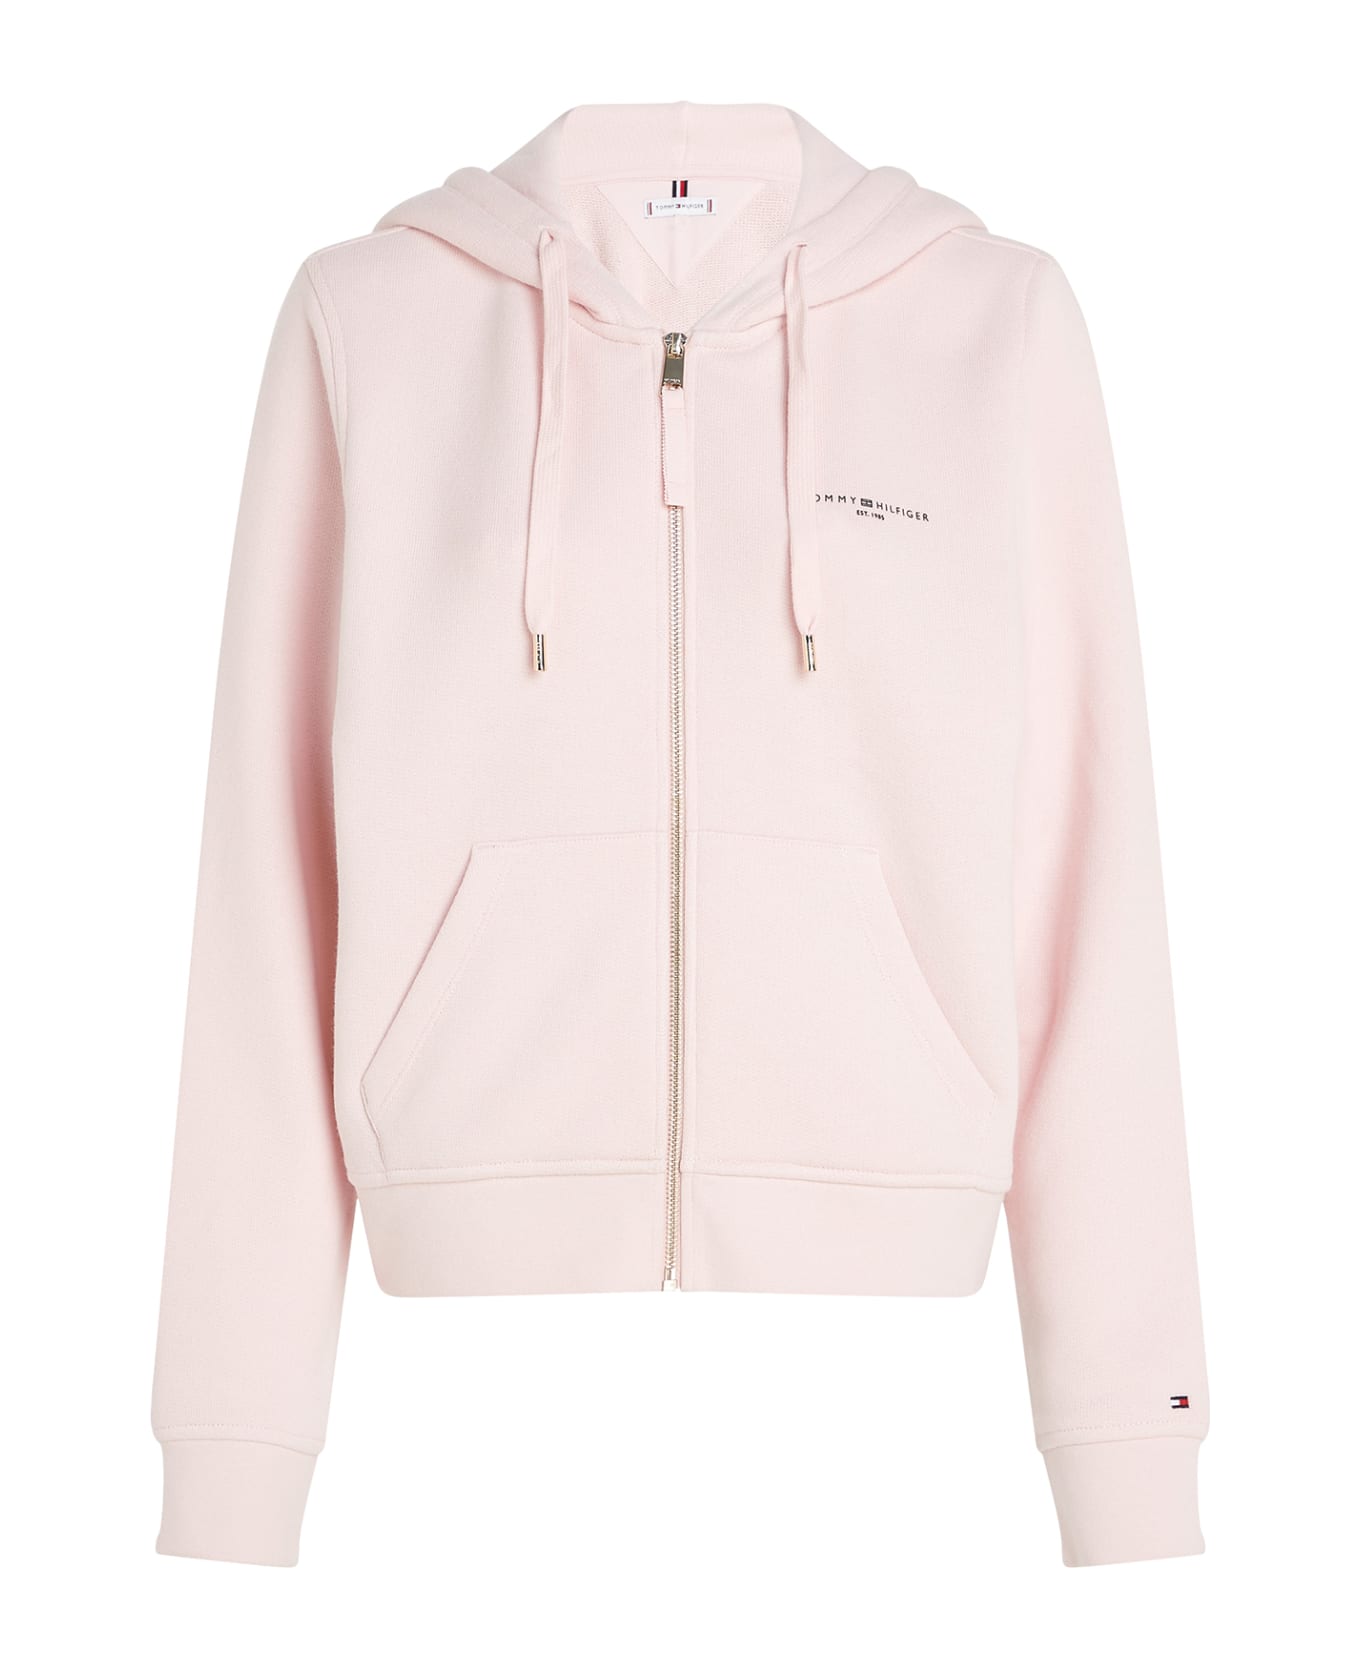 Tommy Hilfiger Pink Sweatshirt With Zip And Hood - WHIMSY PINK